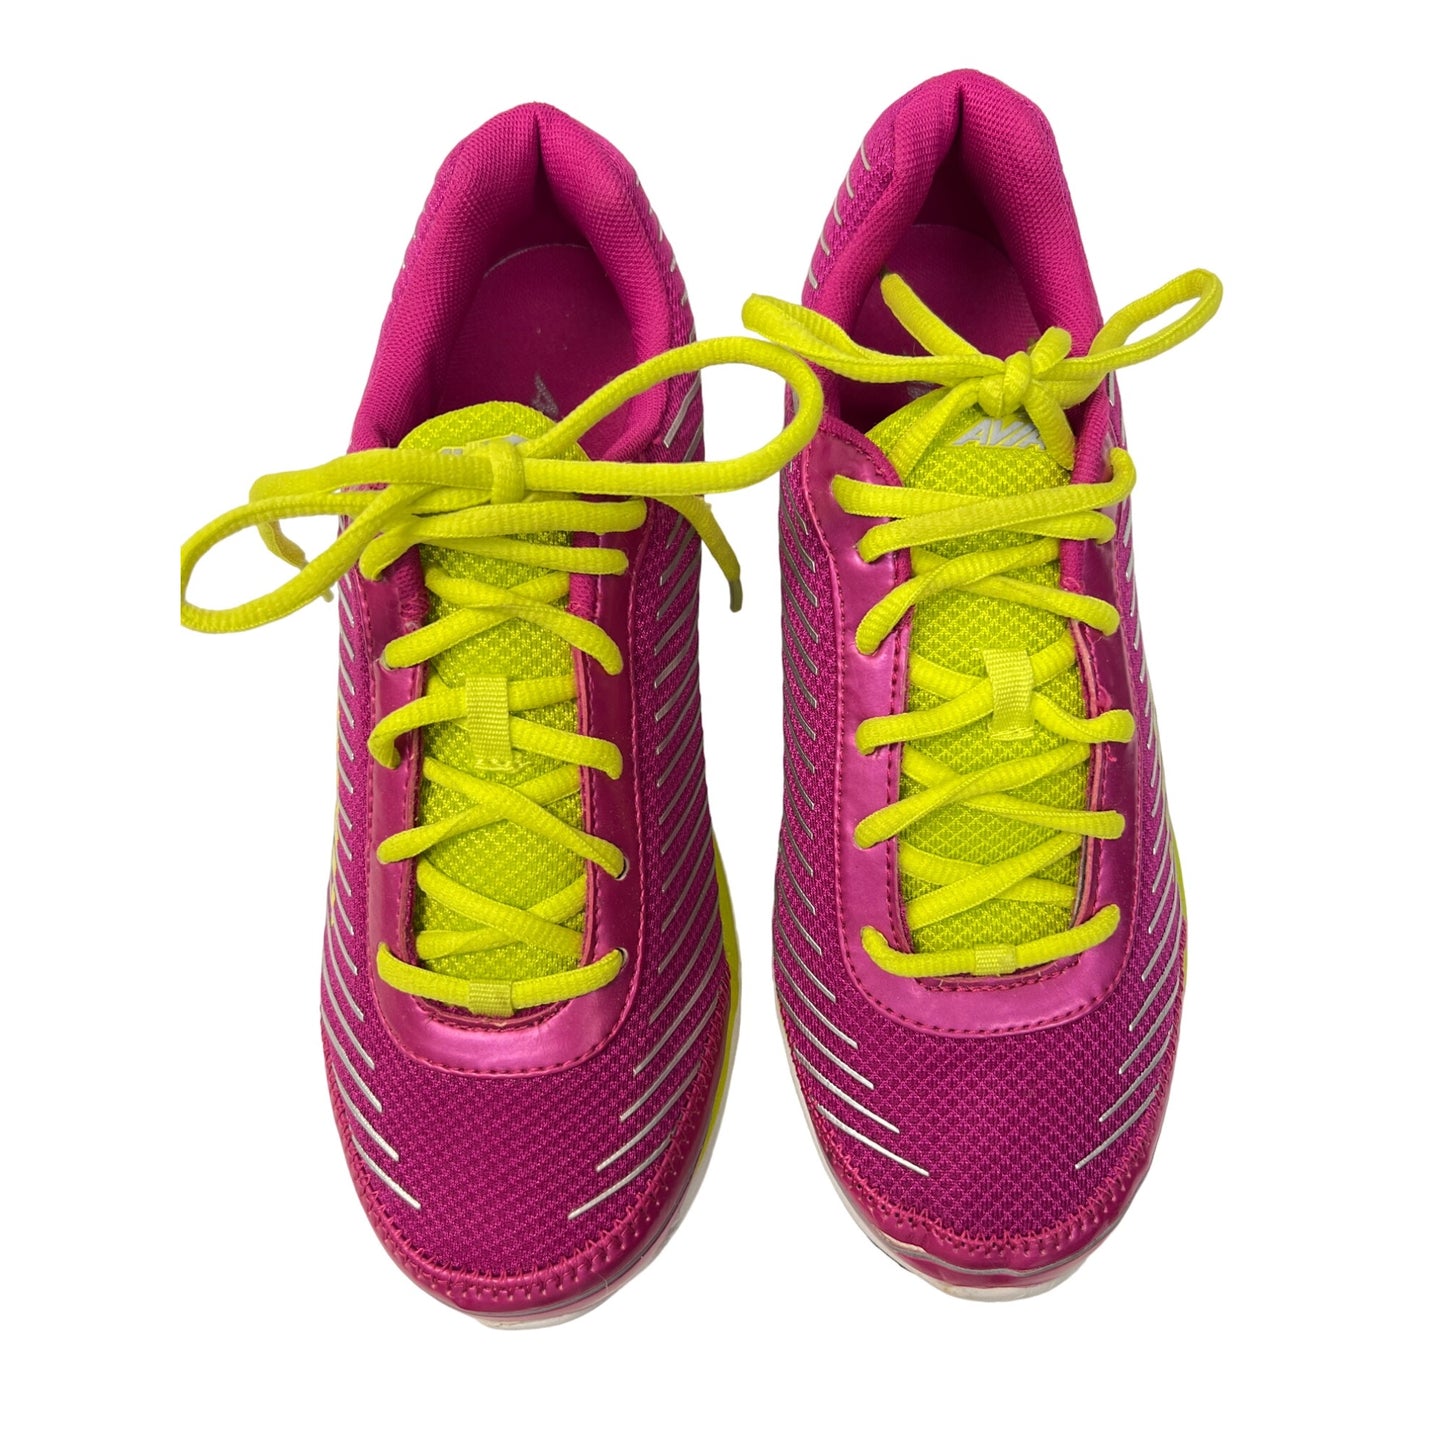 Avia Pink and Yellow Lynx Tennis Shoe Sneakers